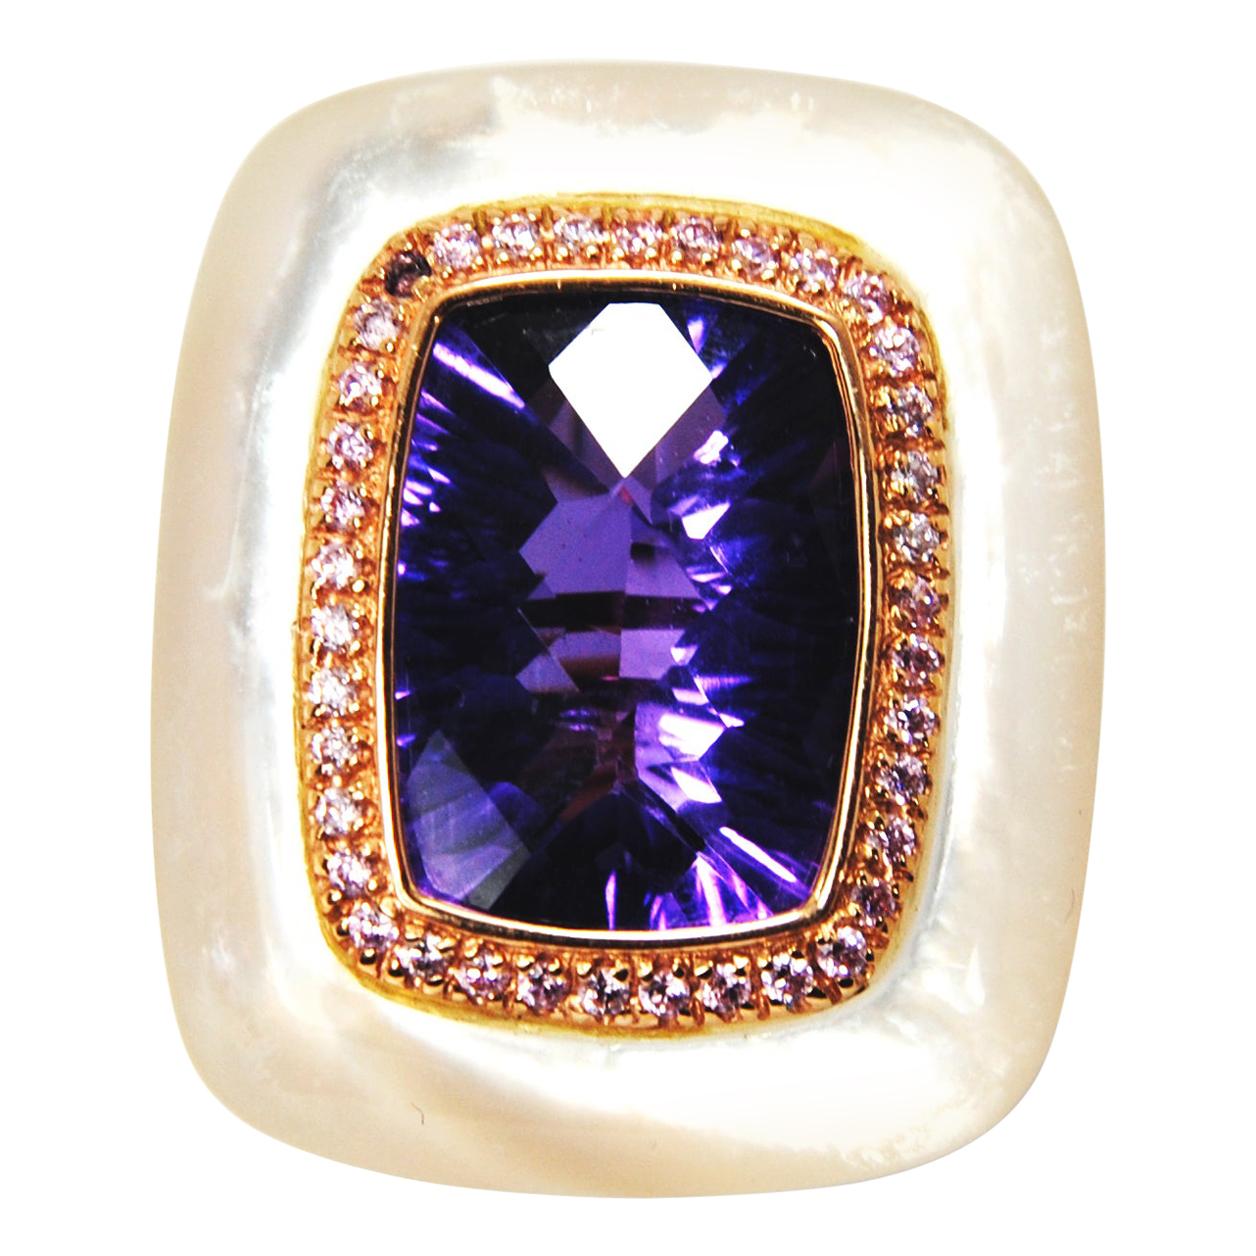 18kt Gold, Amethyst and Mother of Pearl Ring with Frame of 0.20 Carat Diamonds